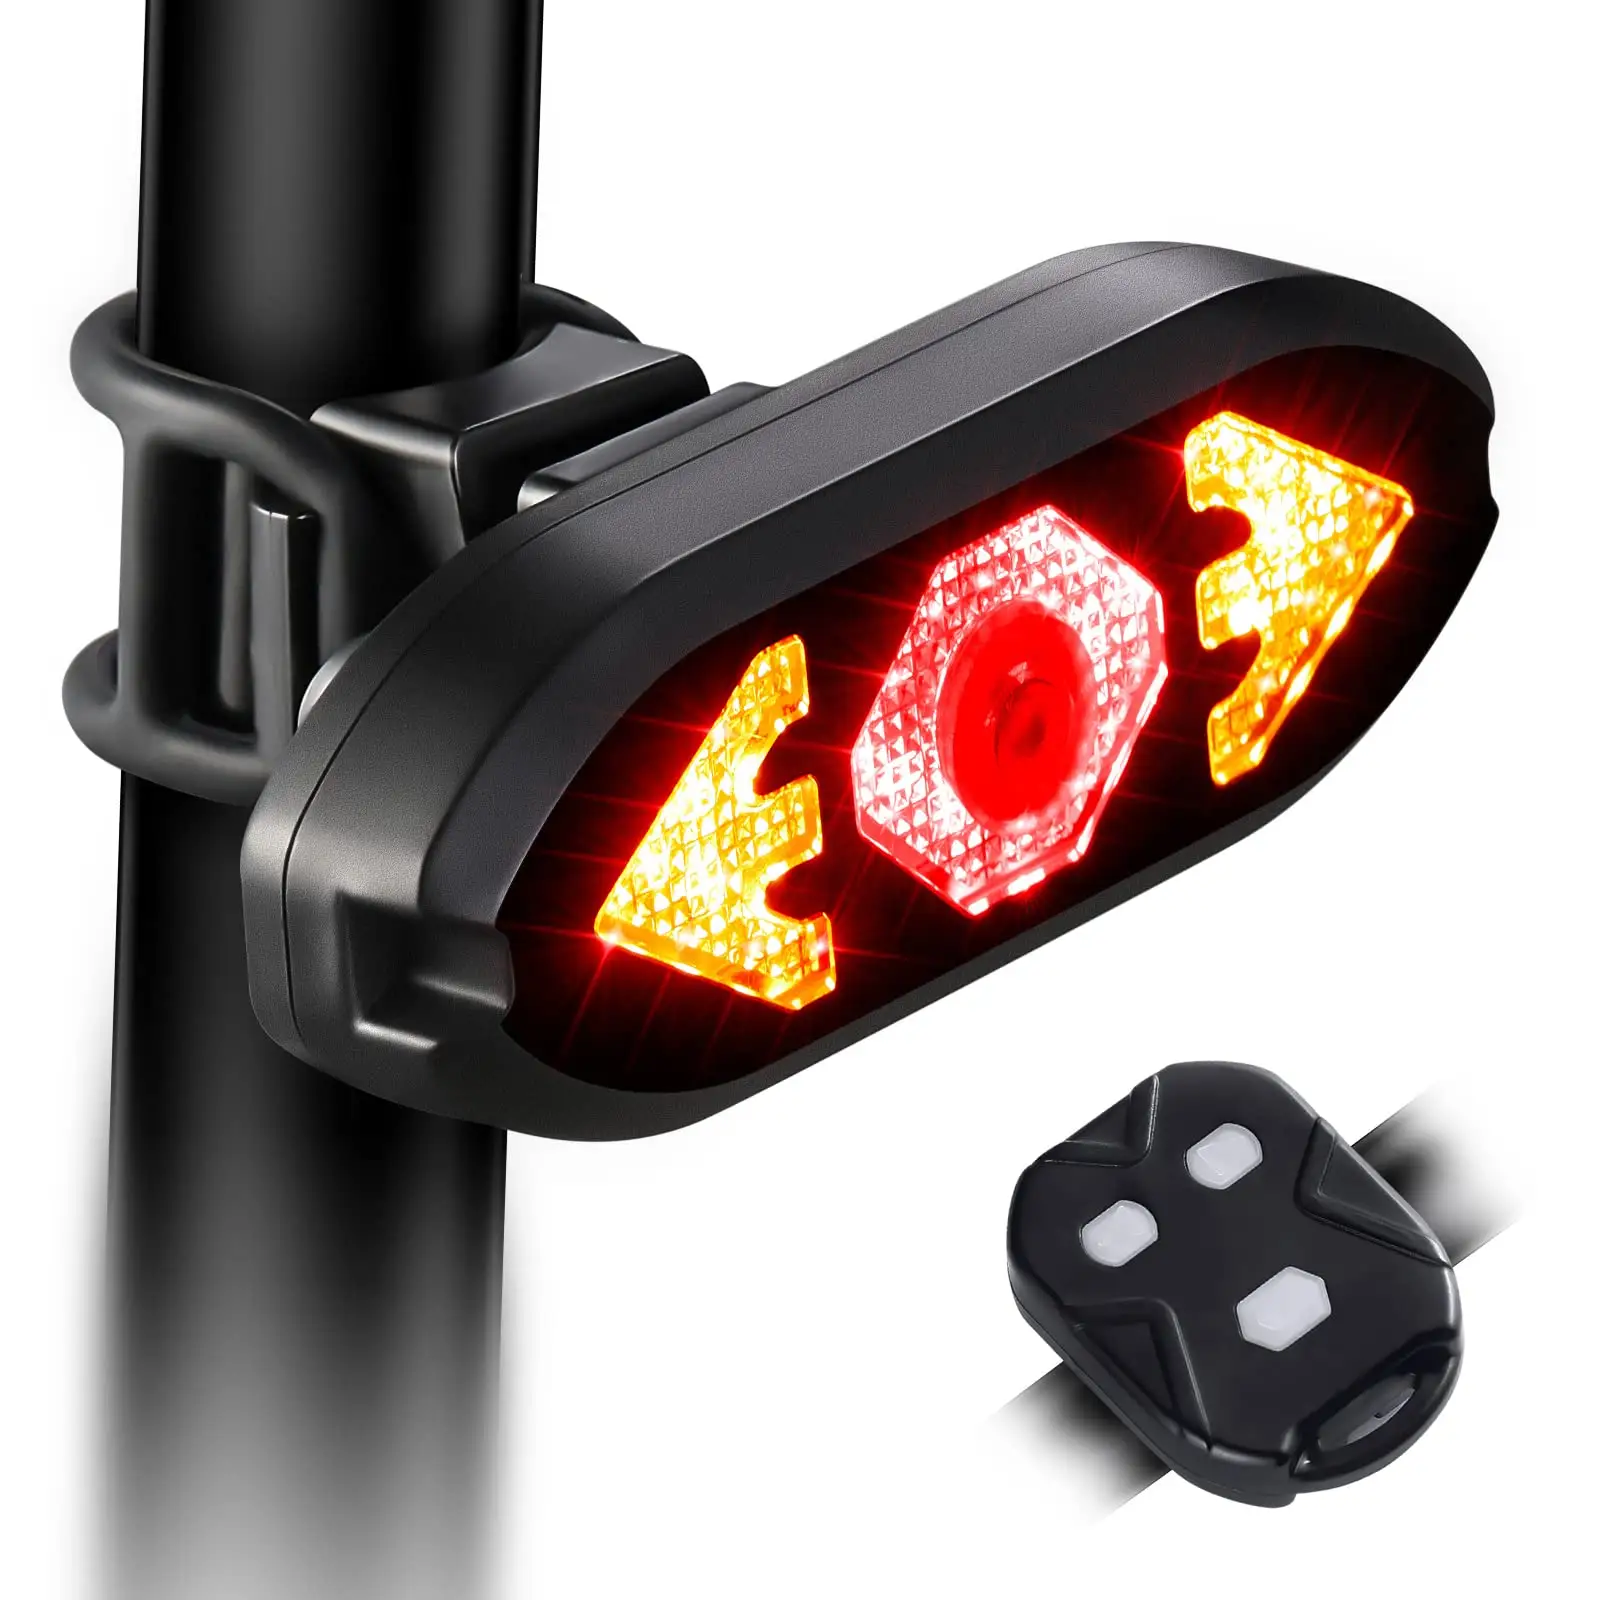 Bike Tail Light with Turn Signals Remote Control Bicycle Rear Lights Bike Horn Alarm Cycling Blinker for Night Riding Bike Light